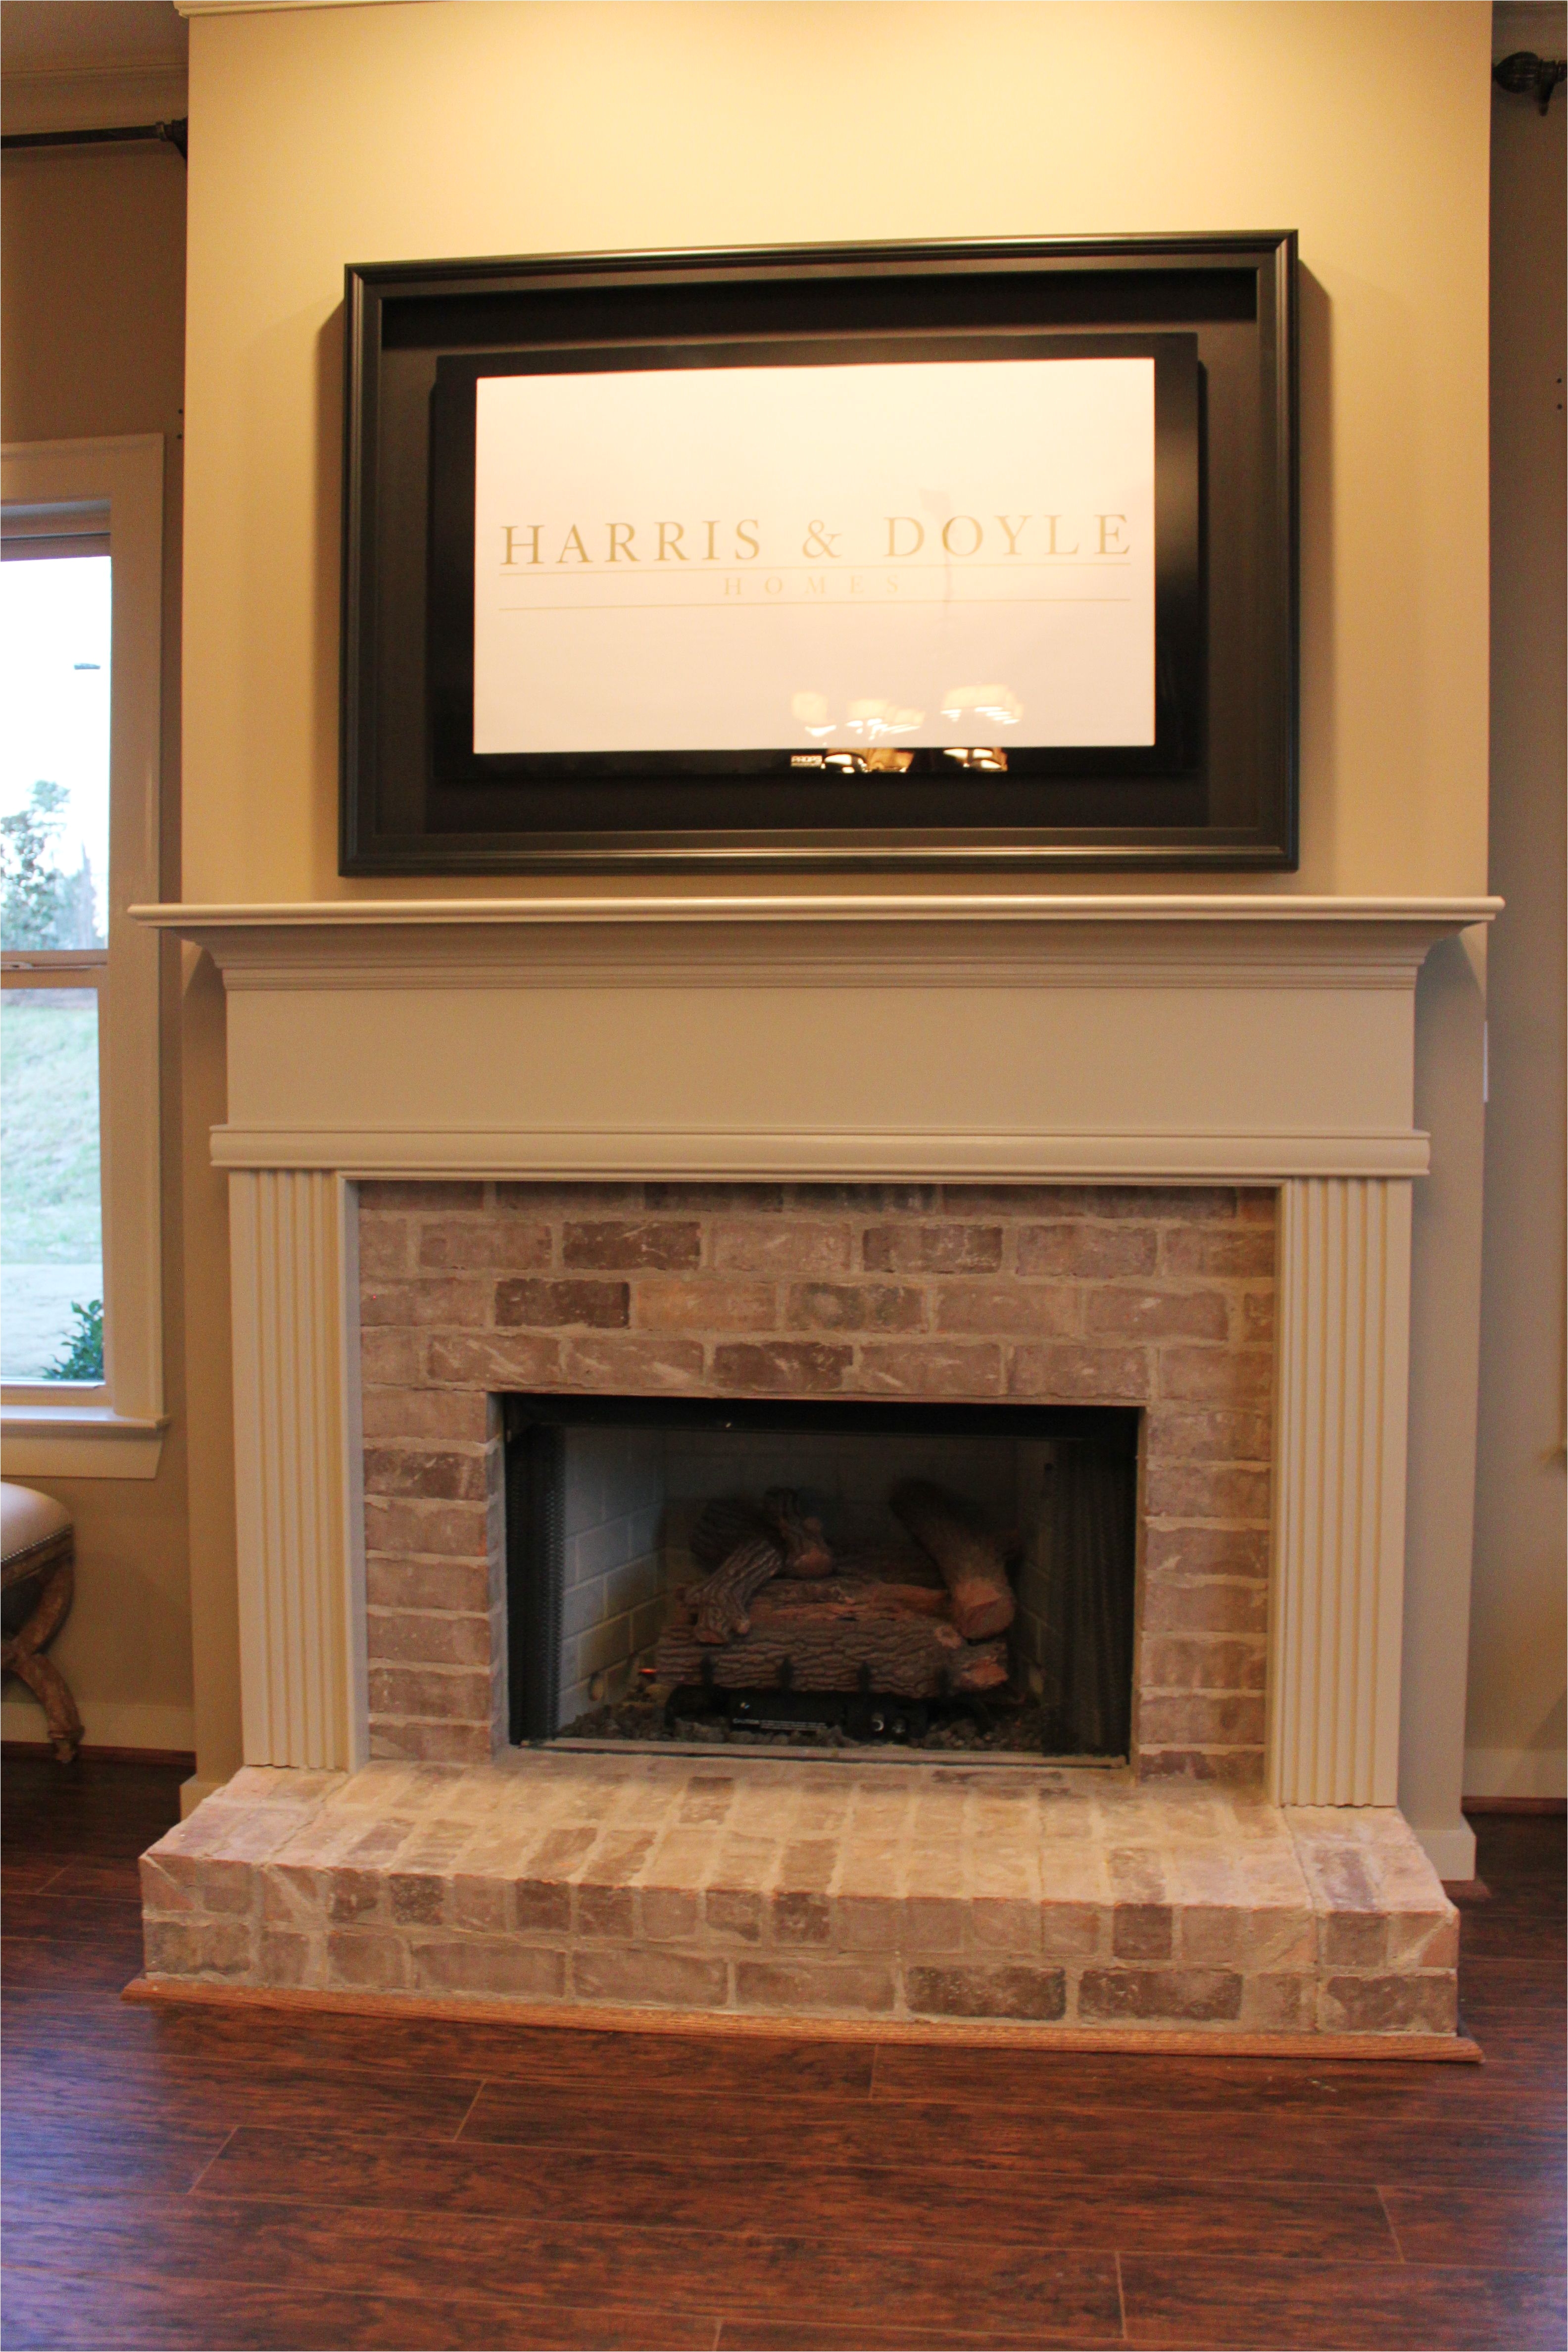 Using Quartz for Fireplace Surround Half Brick Fireplace Surround with Elevated Hearth Home Decor